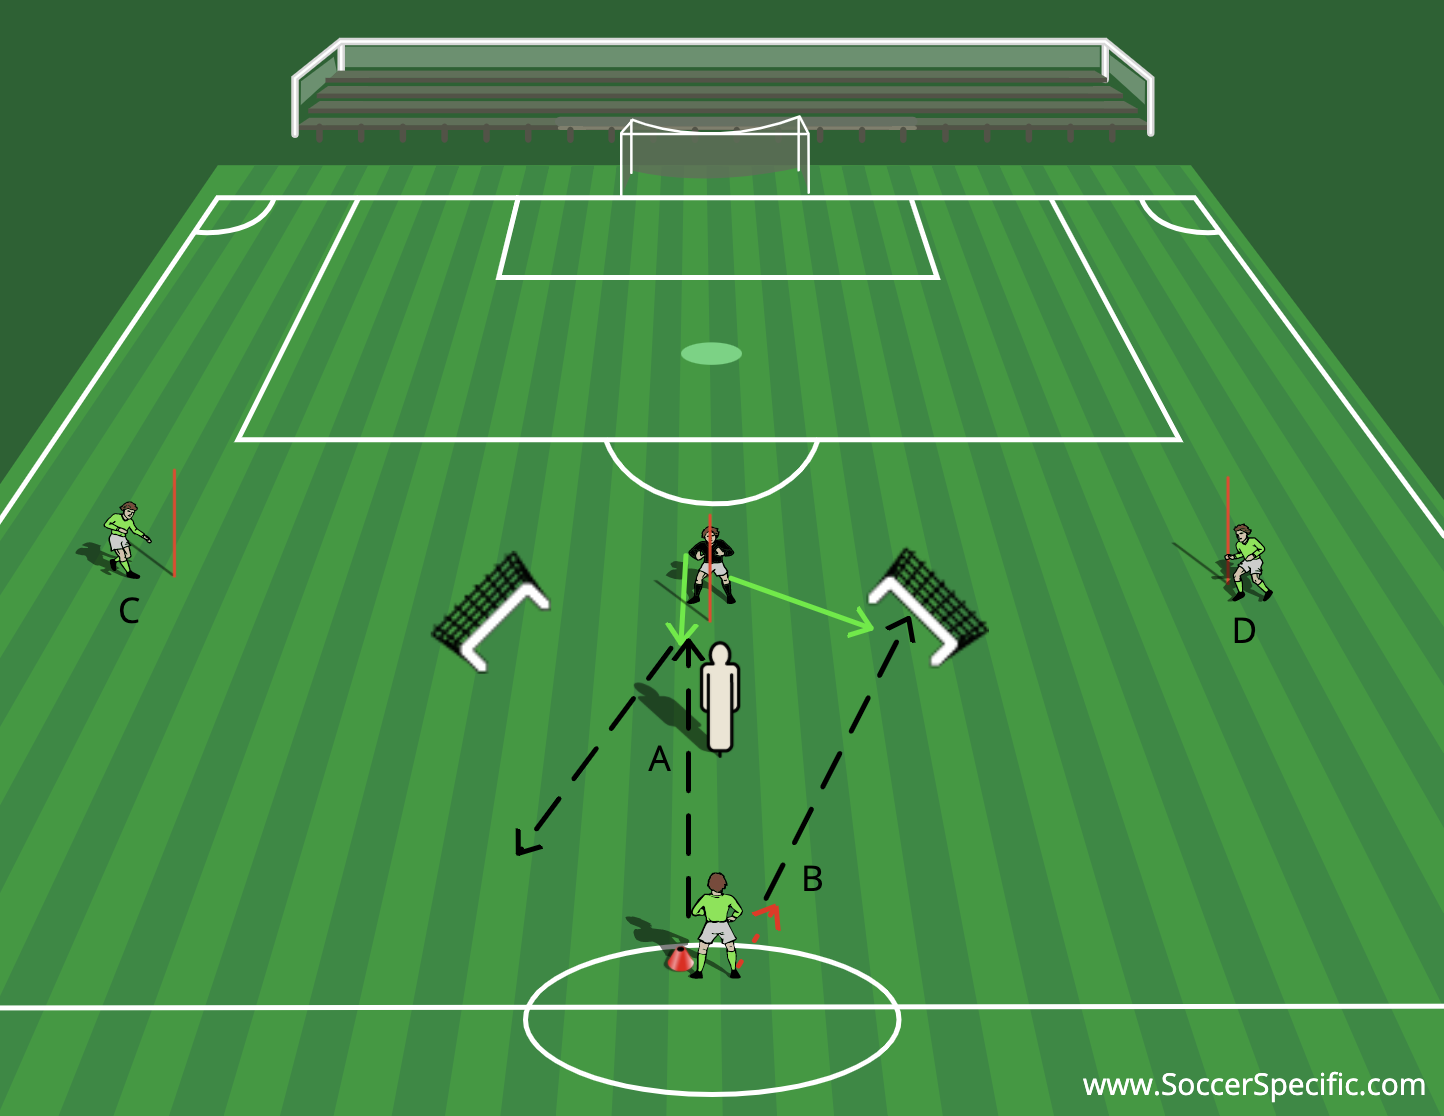 Position Specific Training | SoccerSpecific.com